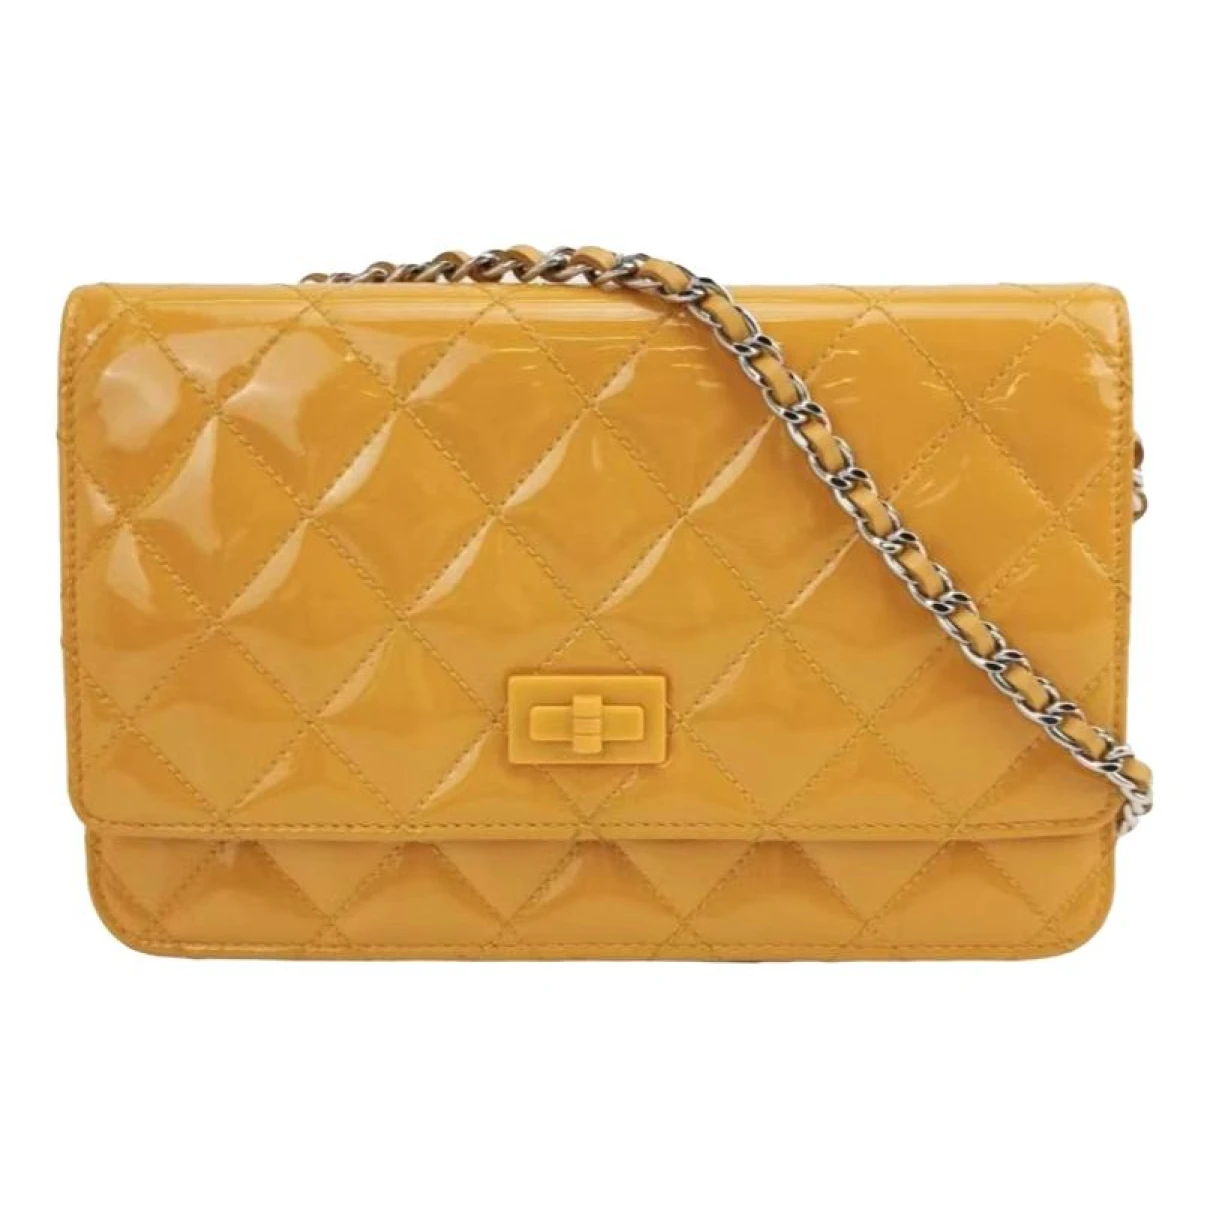 Pre-owned Chanel Wallet On Chain 2.55 Patent Leather Handbag In Yellow